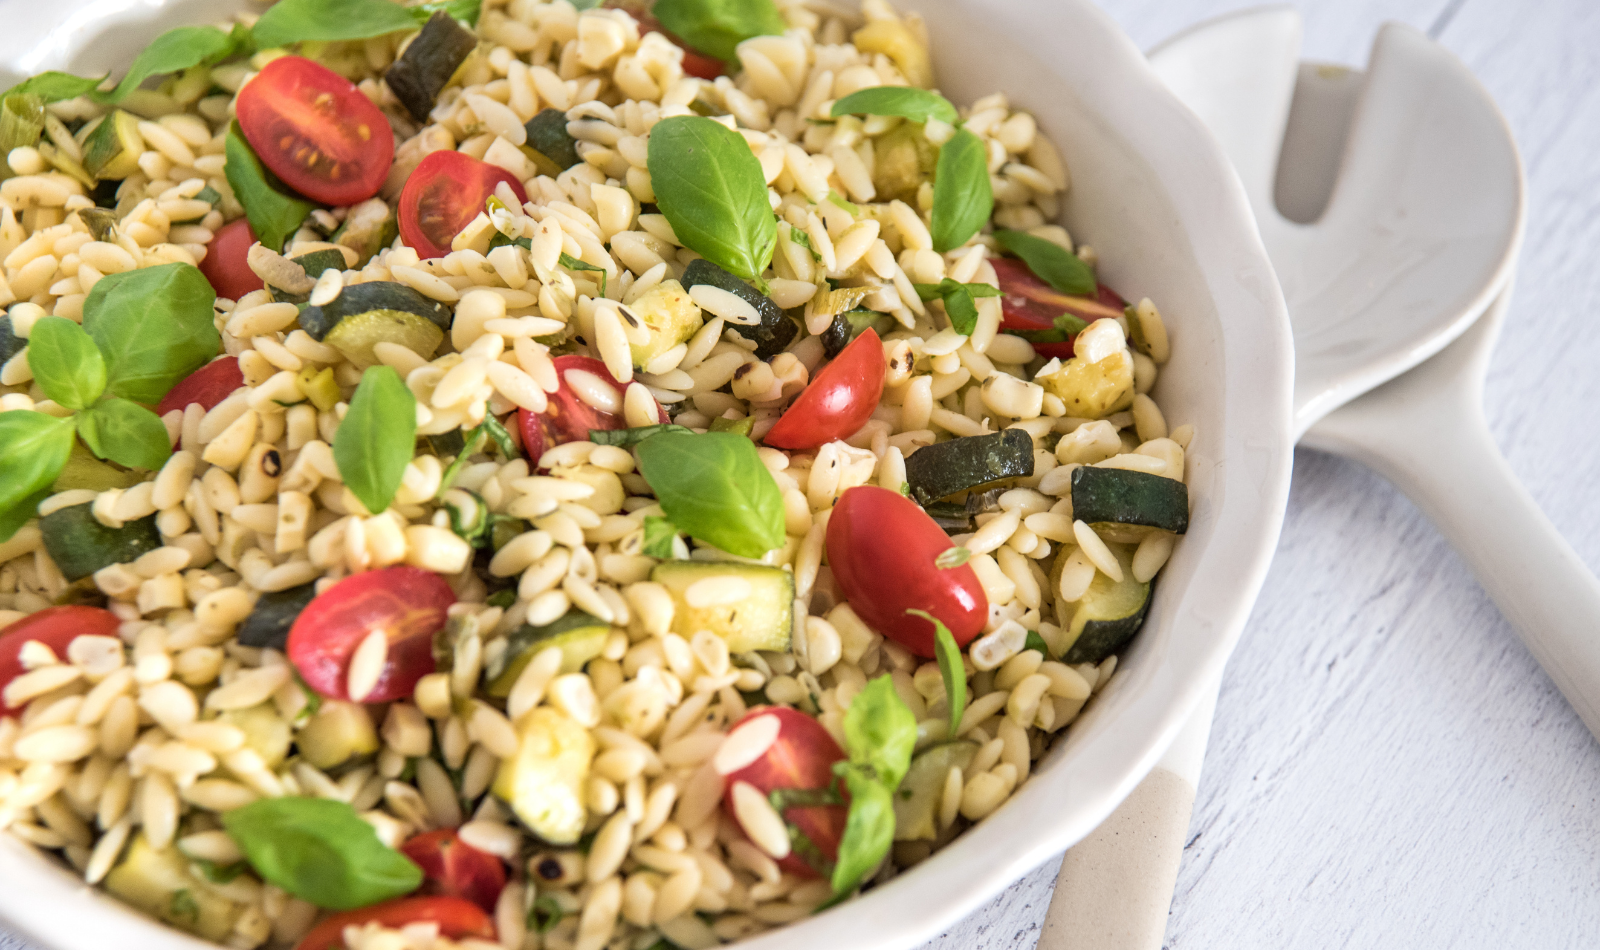 Blog Featured Image - Corn and Zucchini Orzo Salad